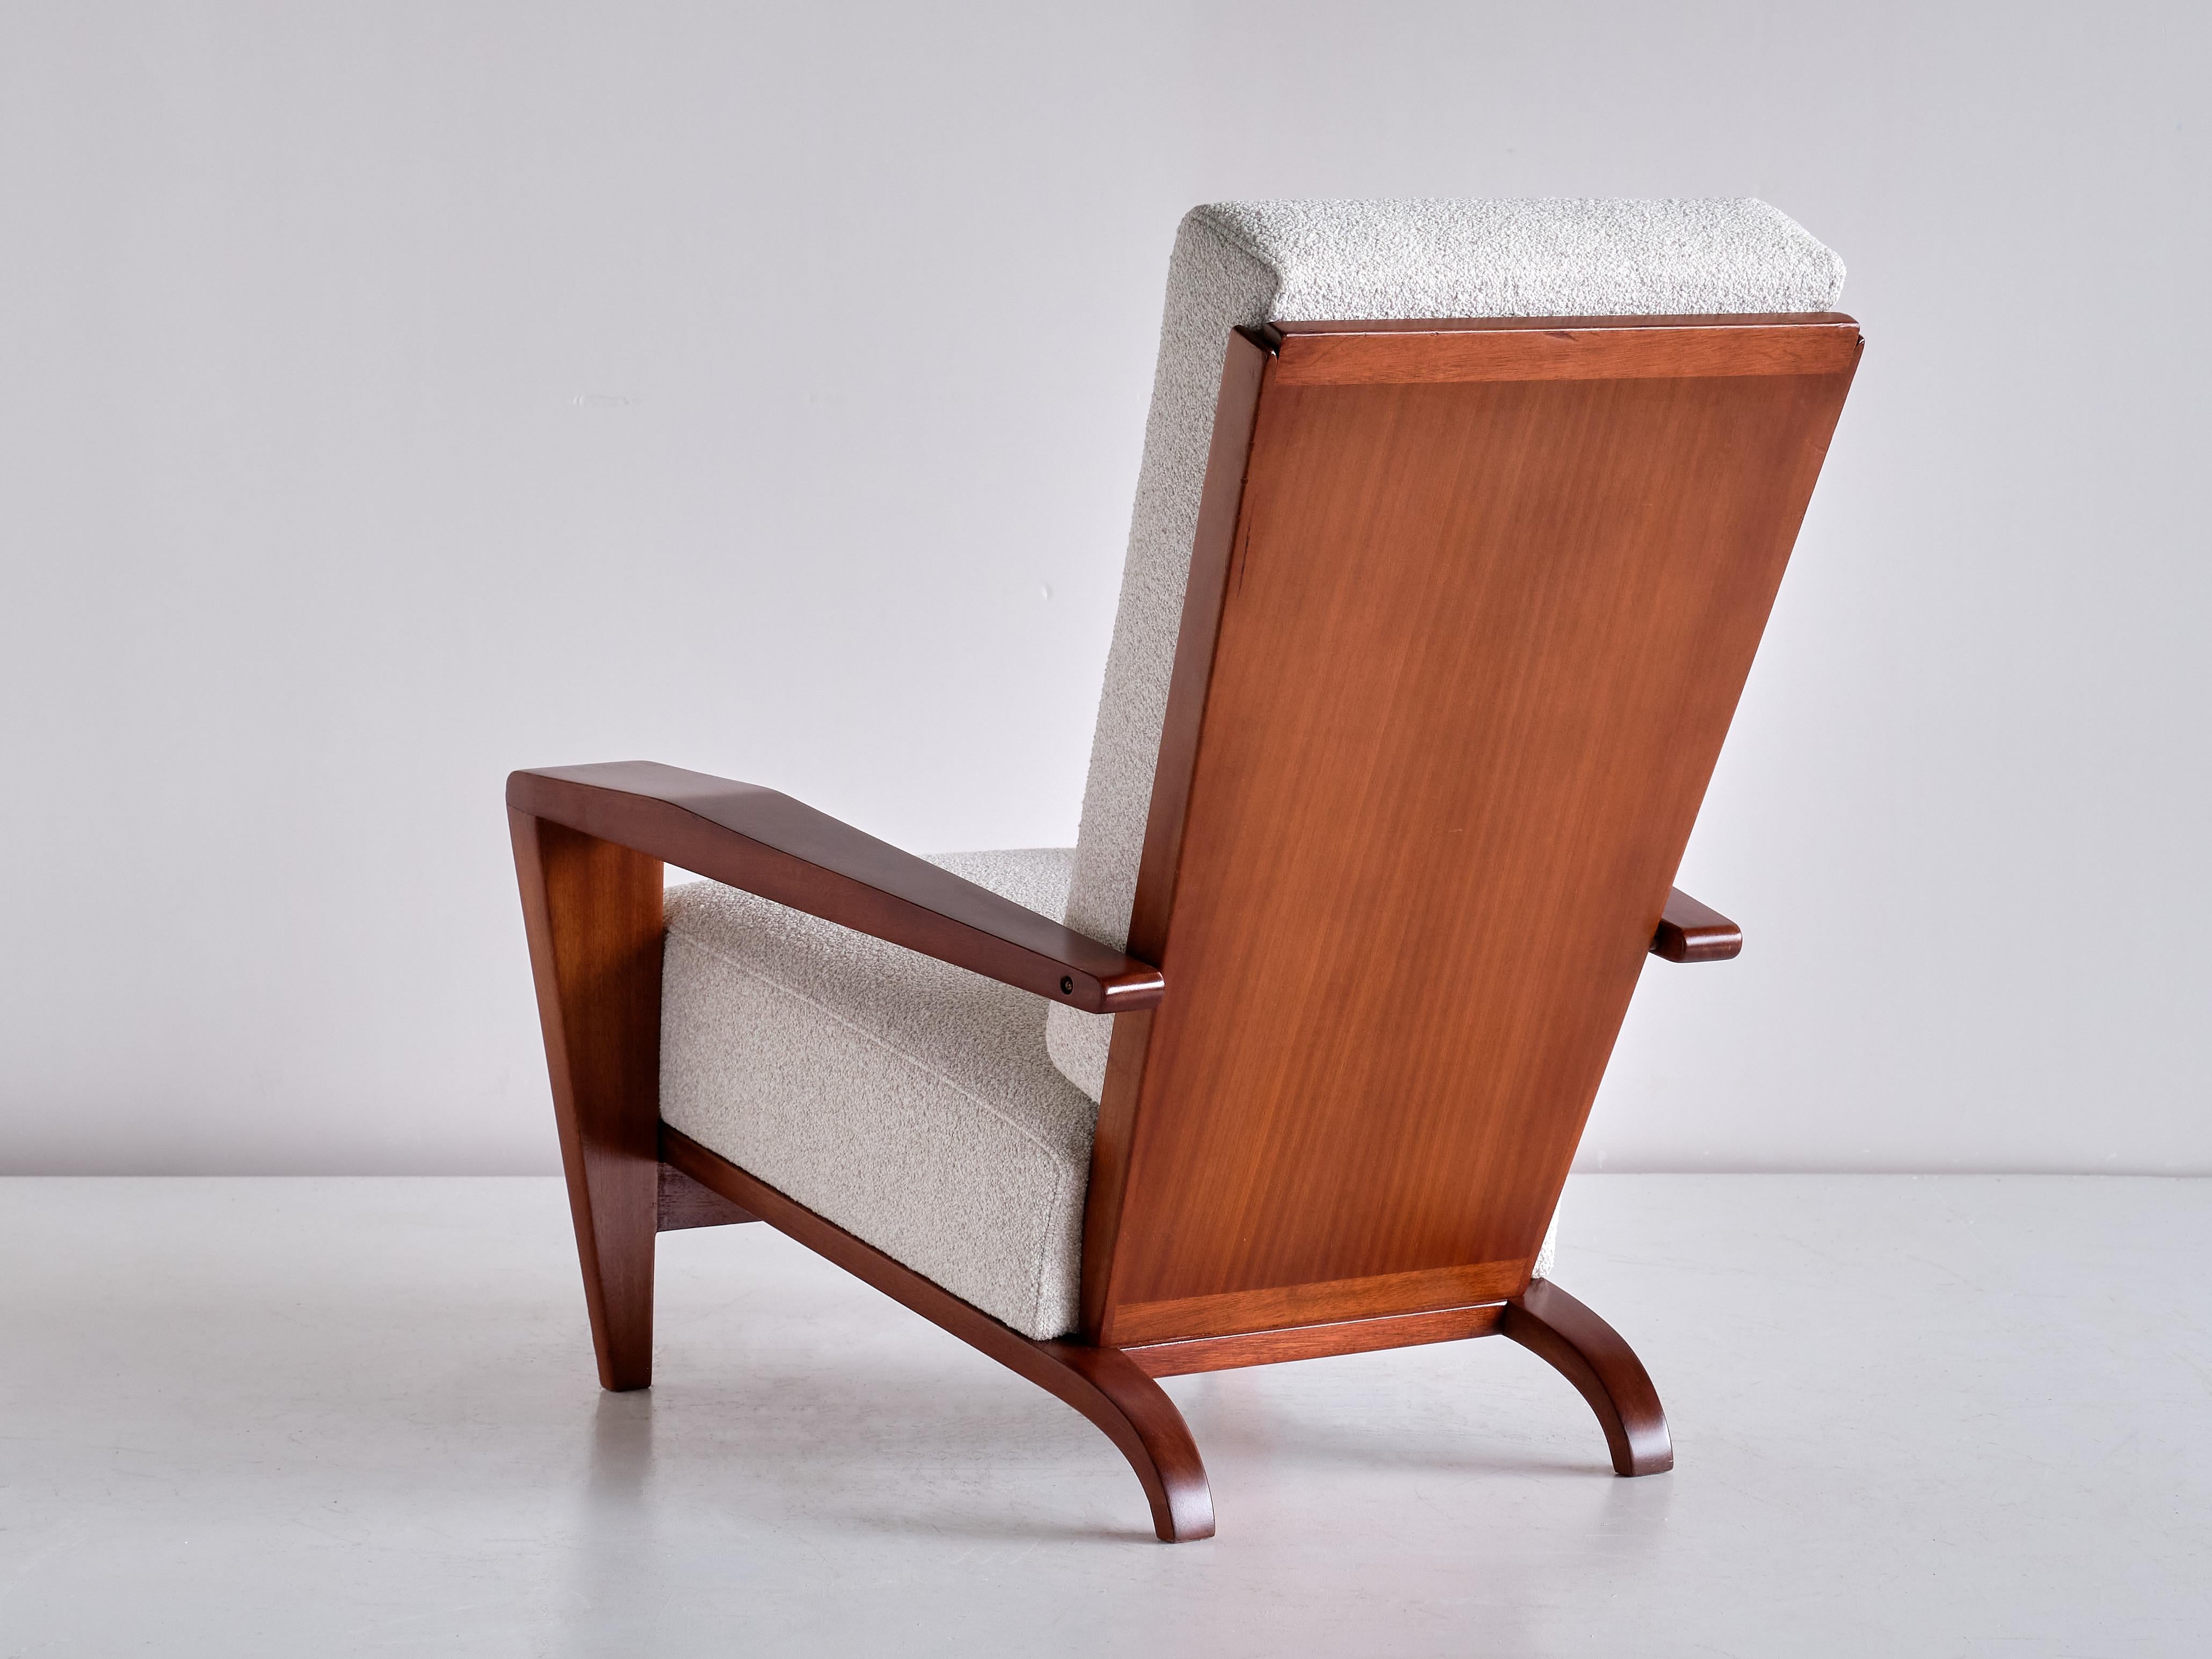 Pair of André Sornay Armchairs in Sapele Mahogany and Bouclé, France, 1950s For Sale 5